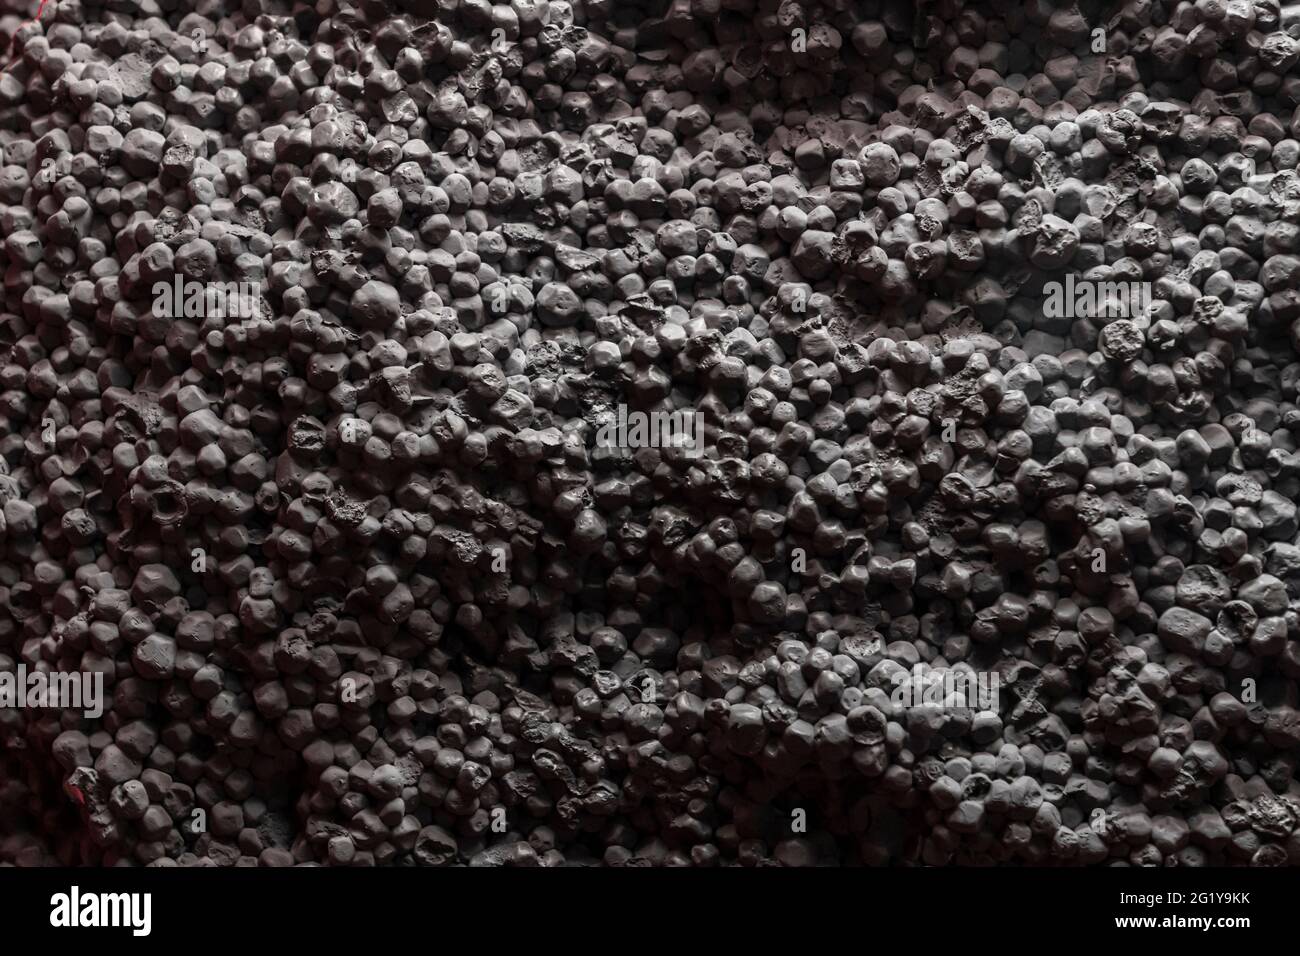 blurr texture is an abstraction. A wall of black balls, like styrofoam. Stock Photo